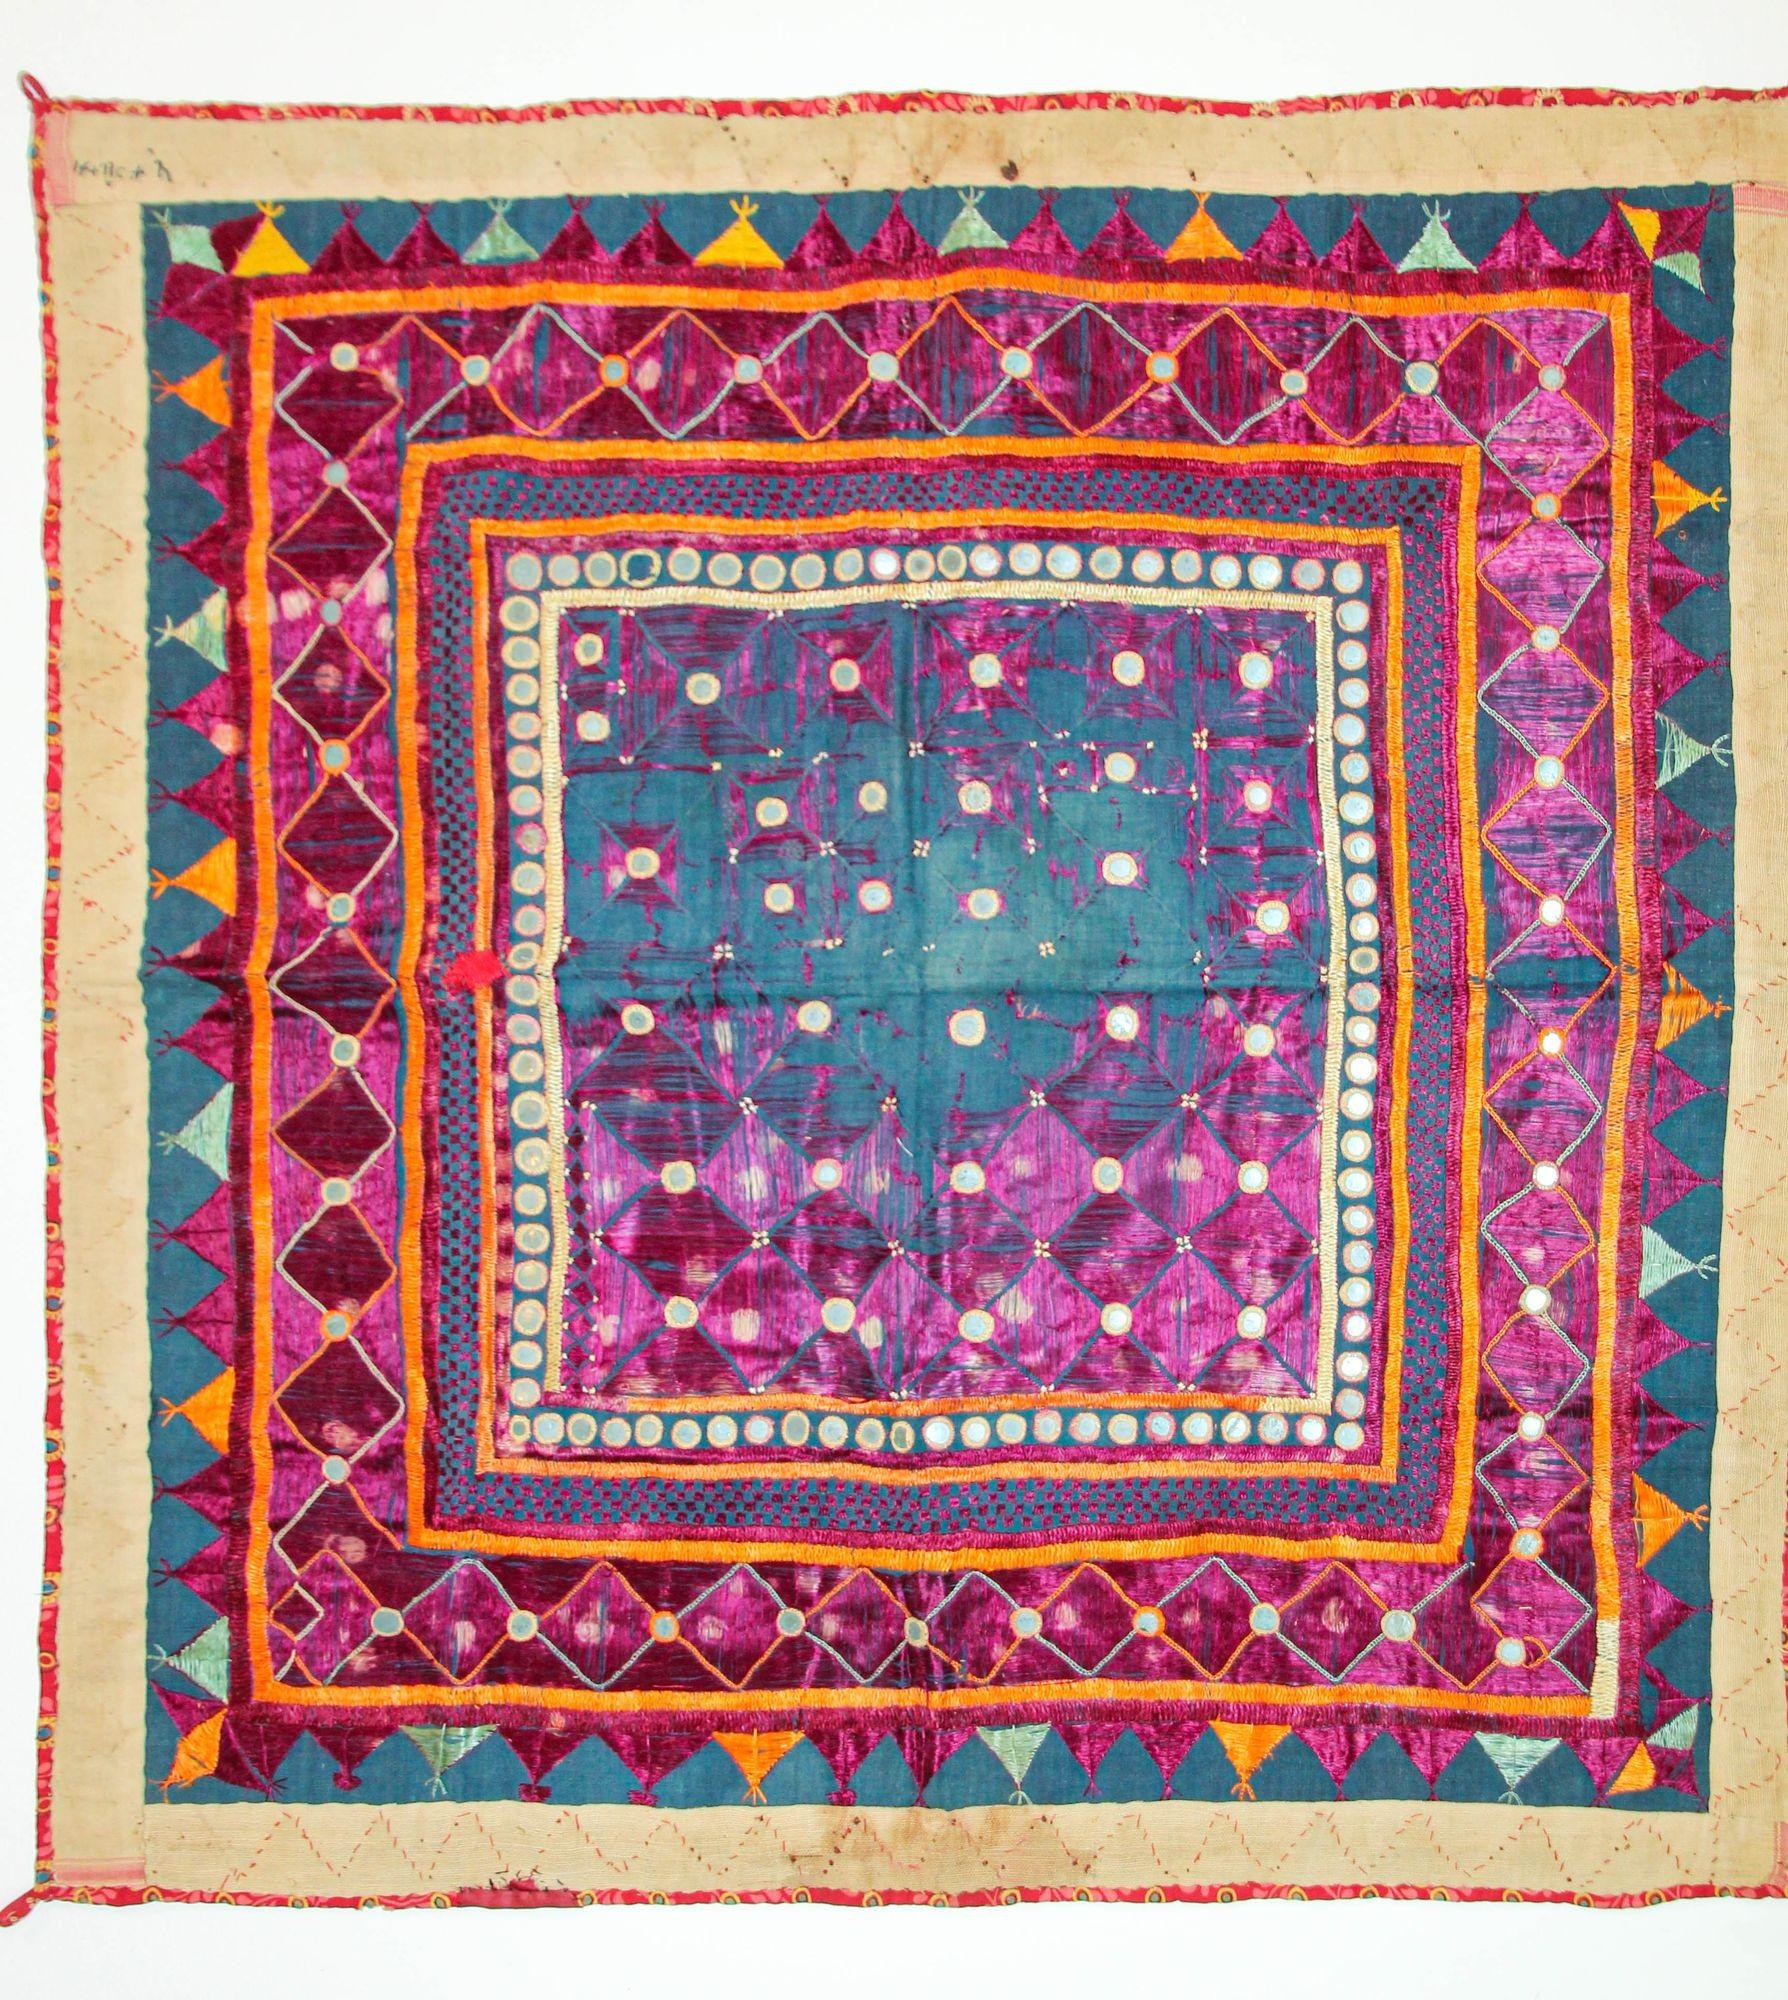 A beautiful vintage Indian textile from Gujarat.
India – Gujarat floss silk embroidery Chalka folk art textile, vintage wall hanging.
Antique Banjara Embroidered Chaakla textile with Mirrors, Wall Hanging, India.
Banjara tribal Chaakla textile wall